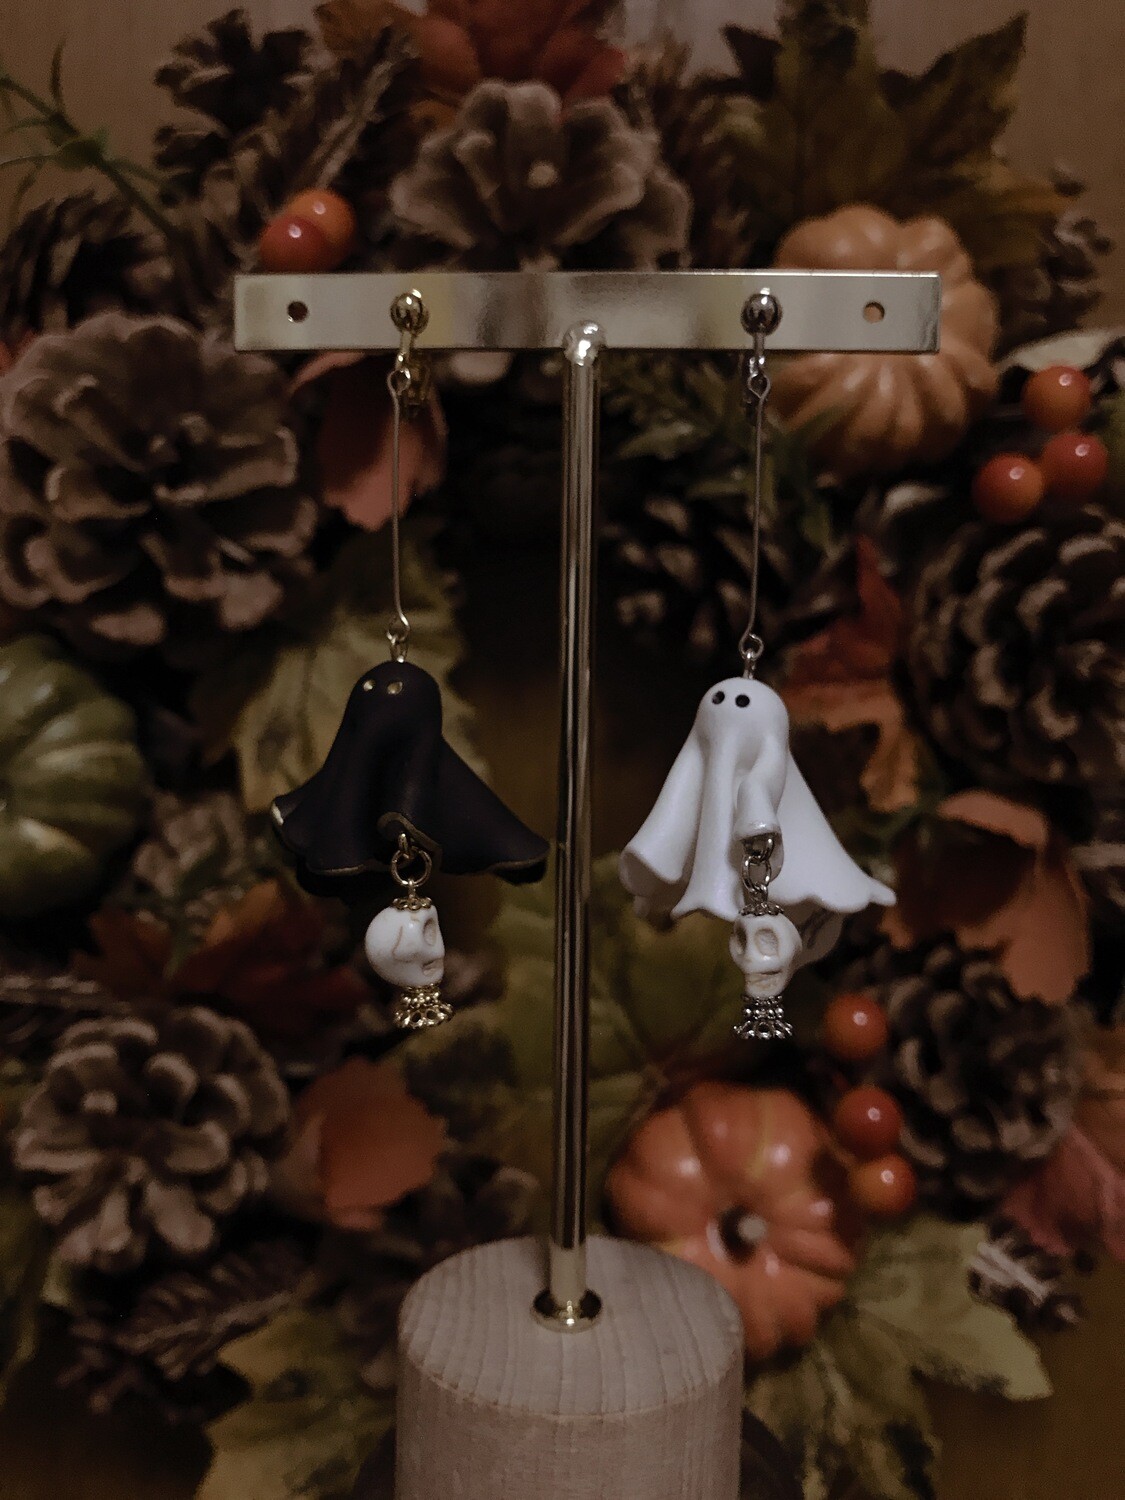 "Who are you?" Wandering ghost earring Skull lamp